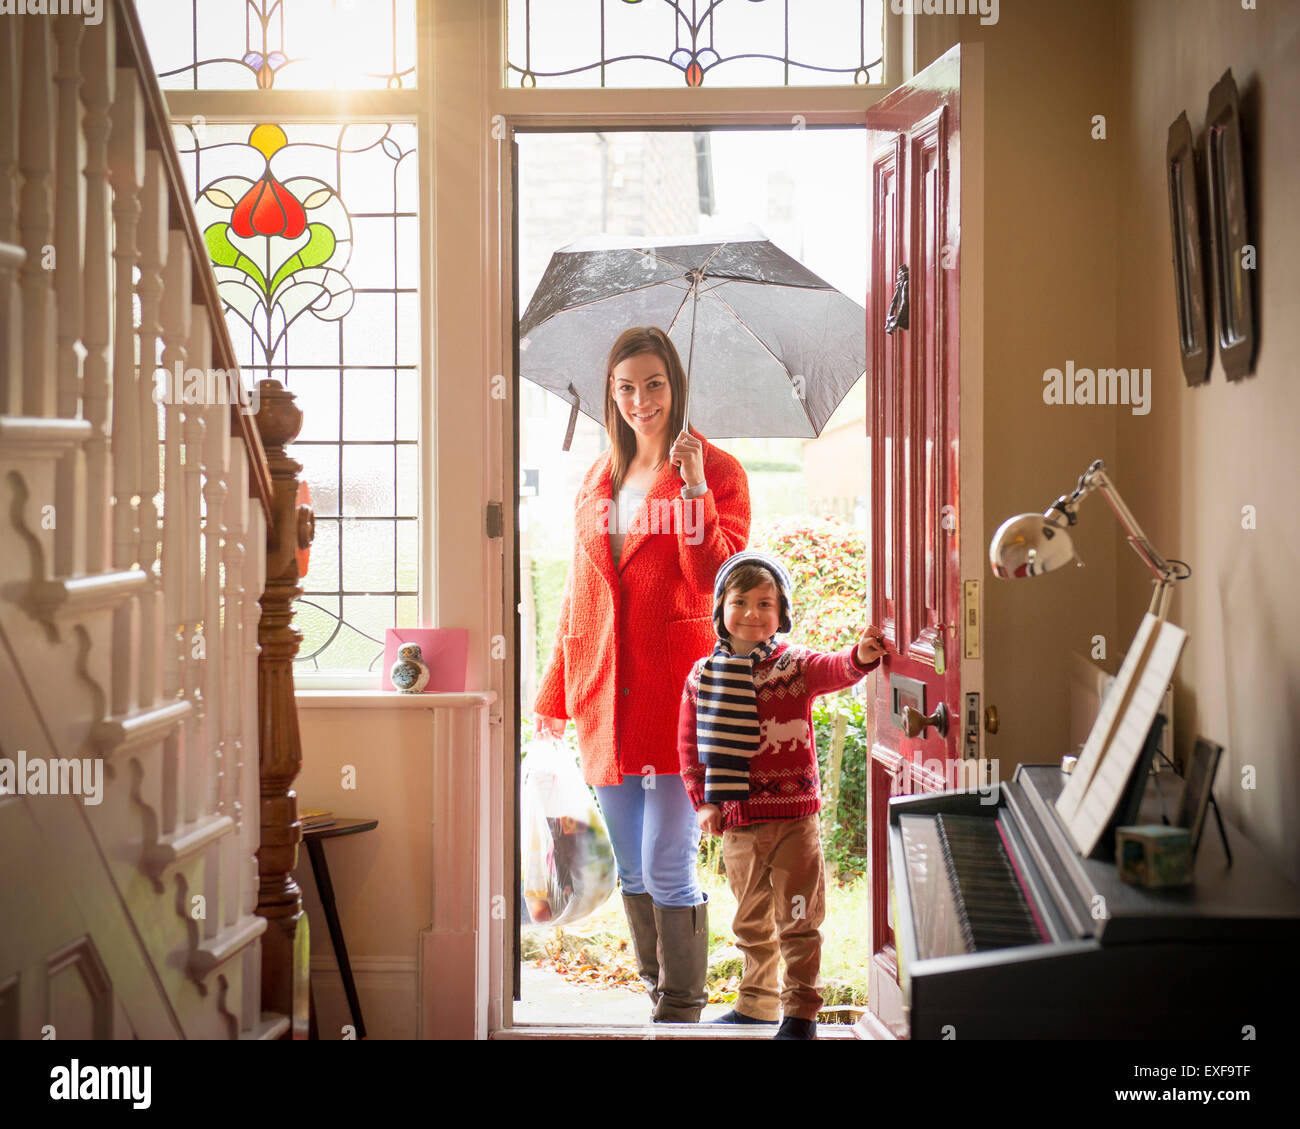 Mother and son arriving at front door of home on rainy day, portrait Stock Photo